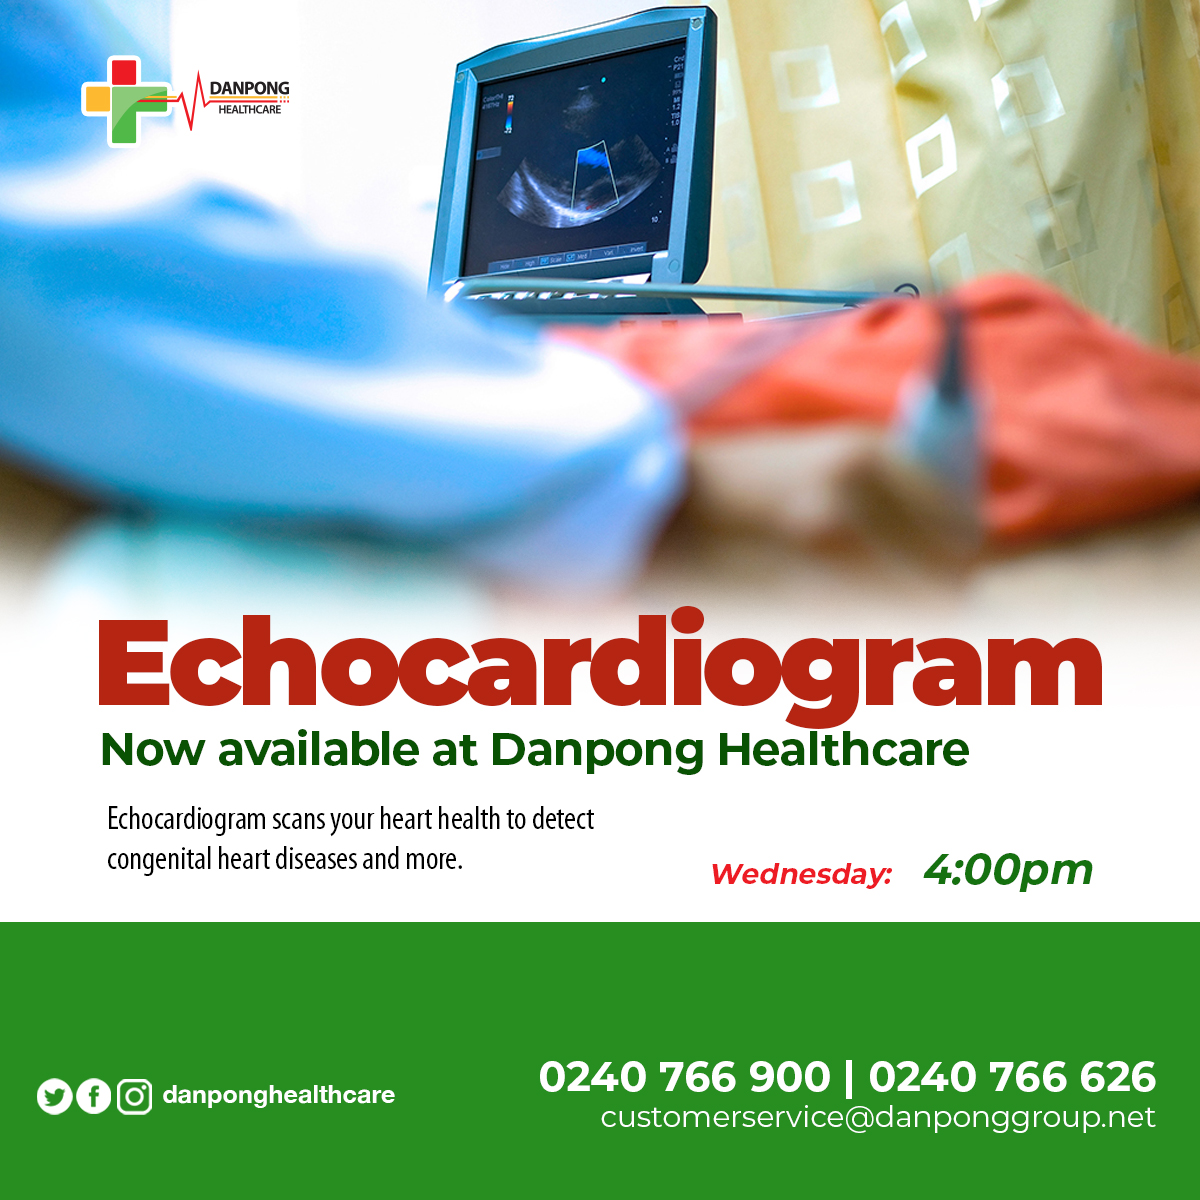 Echocardiogram now available at Danpong Healthcare.
Wednesdays - 4:00pm

Echocardiogram scans your heart health to detect
congenital heart diseases and more.

#Danpongcares
#Healthyandhappy